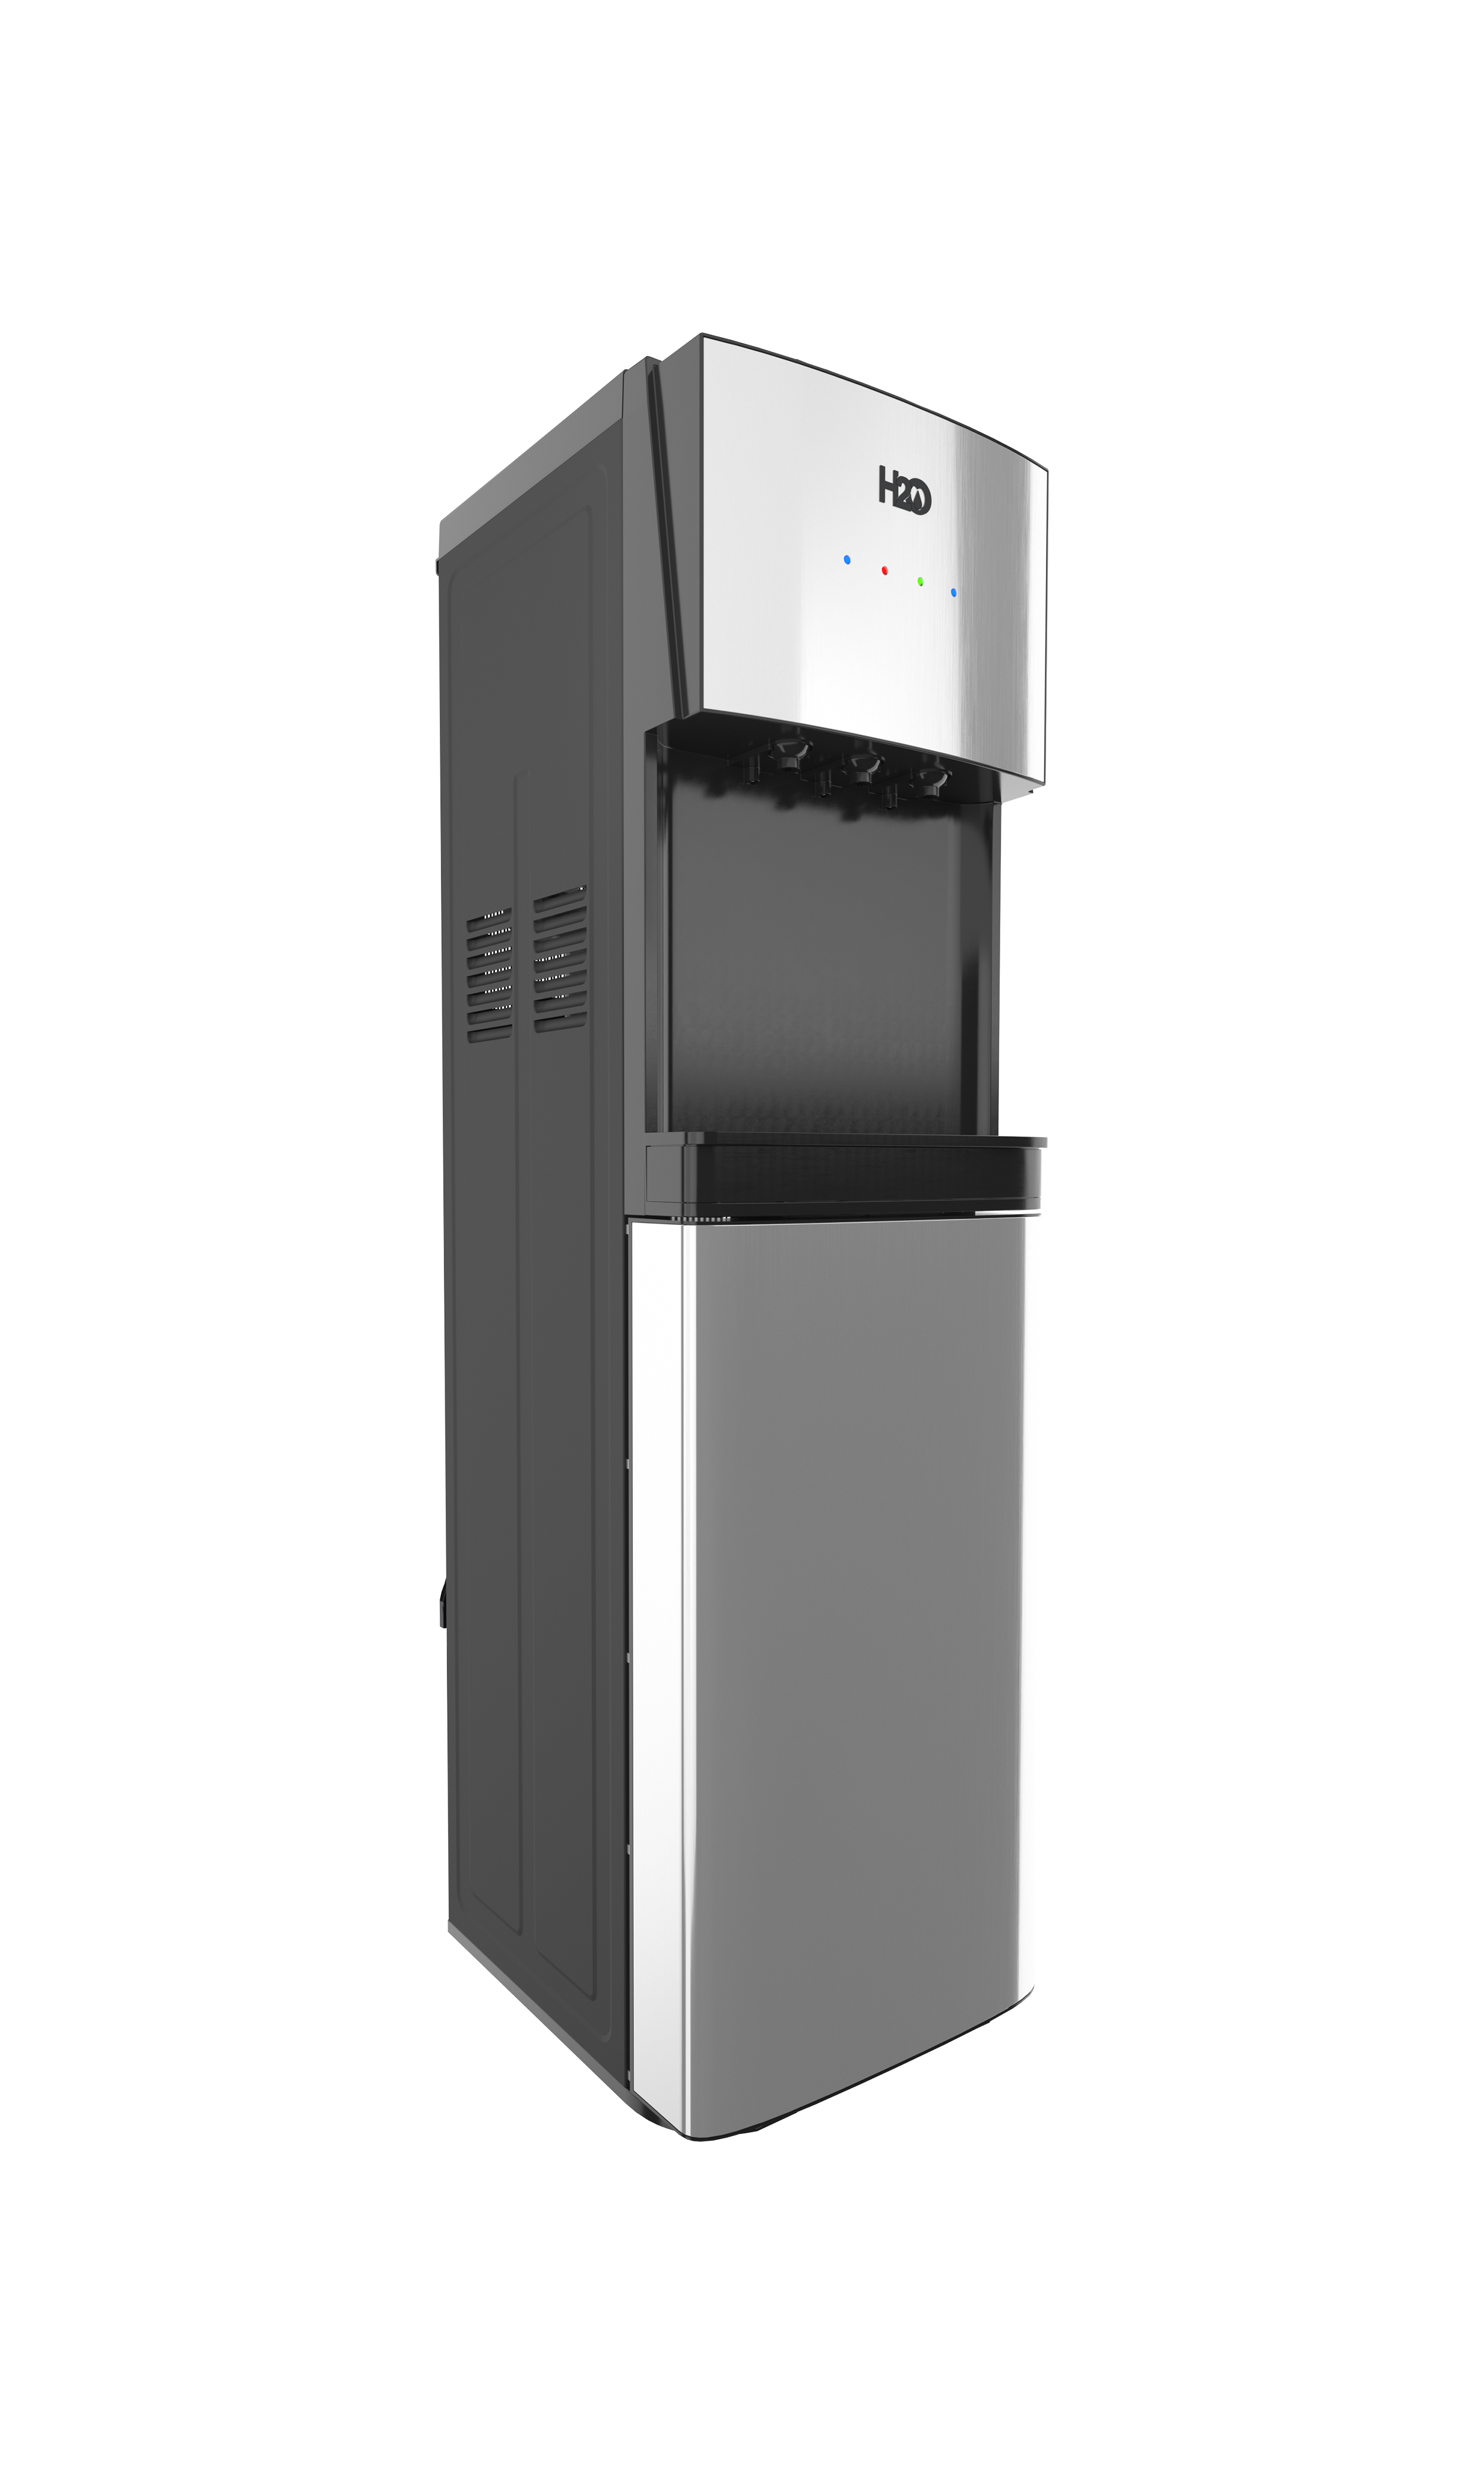 H2O-96UT UV Self-Cleaning Bottom Load Water Dispenser in Black with 40-48° F Cold Water Temperature, h2o - image 3 of 10